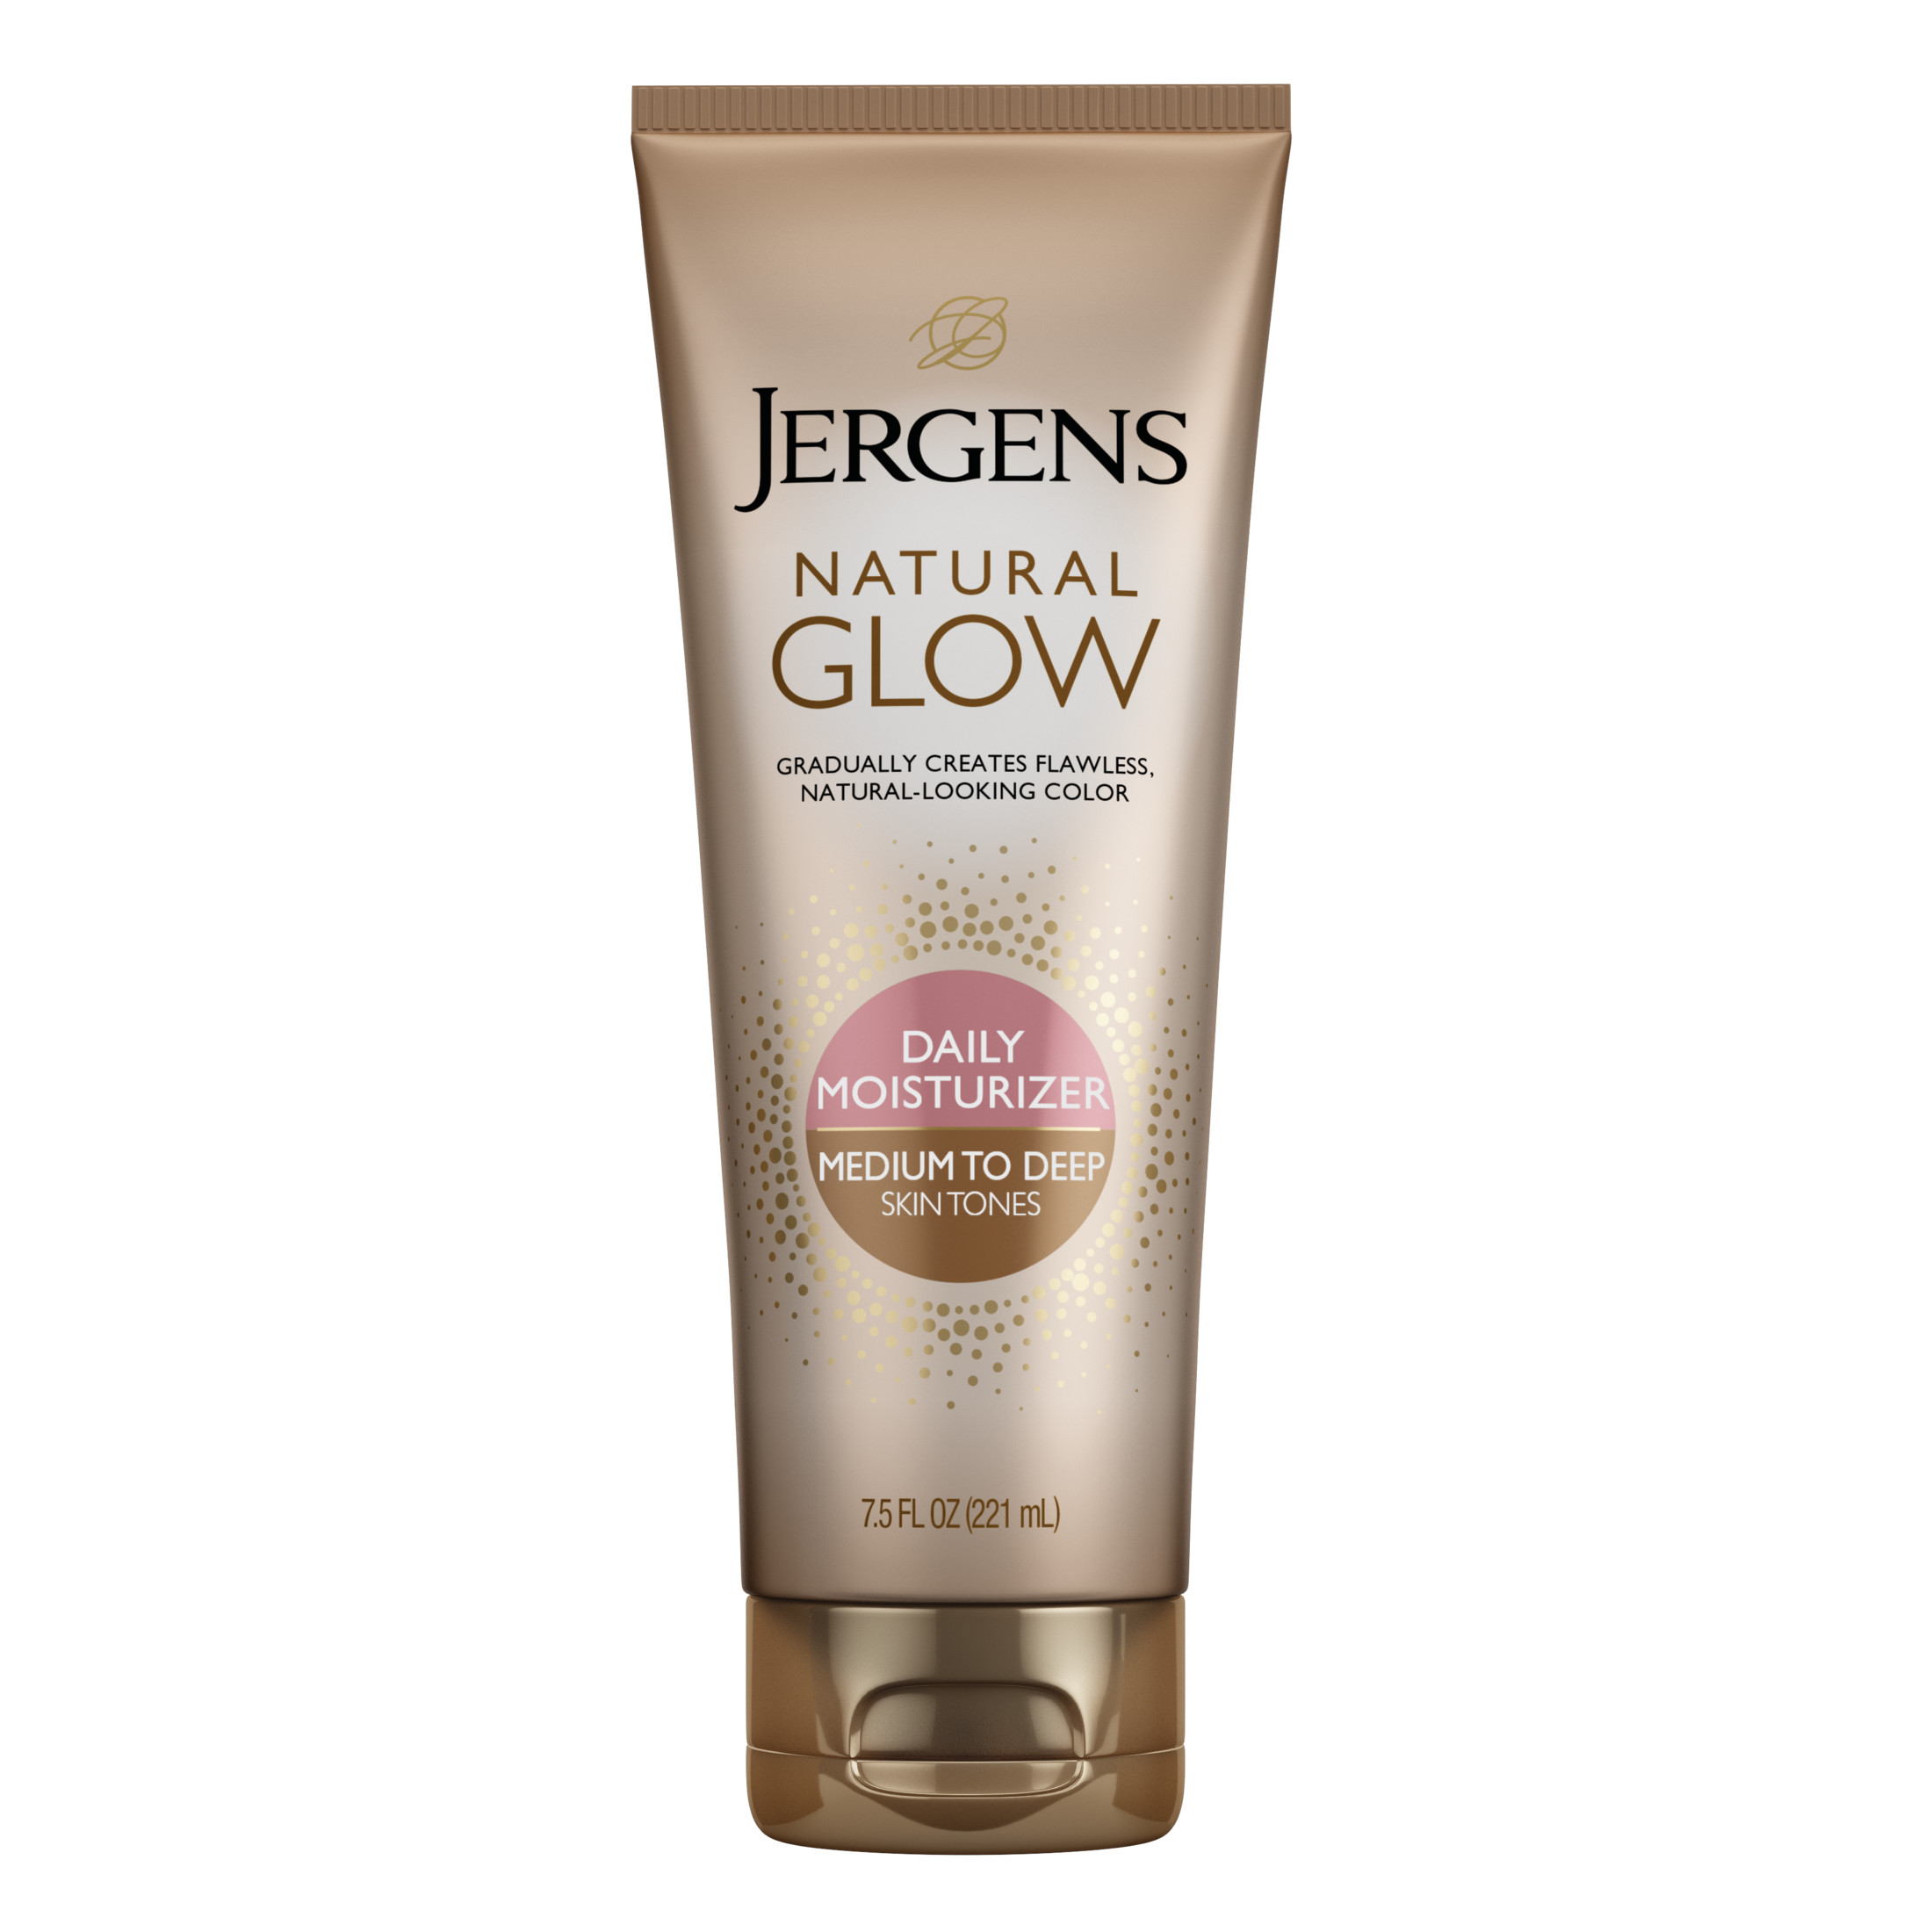 Jergens Natural Glow Sunless Tanning Daily Body Lotion, Medium to Deep Skin Tone, 7.5 fl oz - image 1 of 11